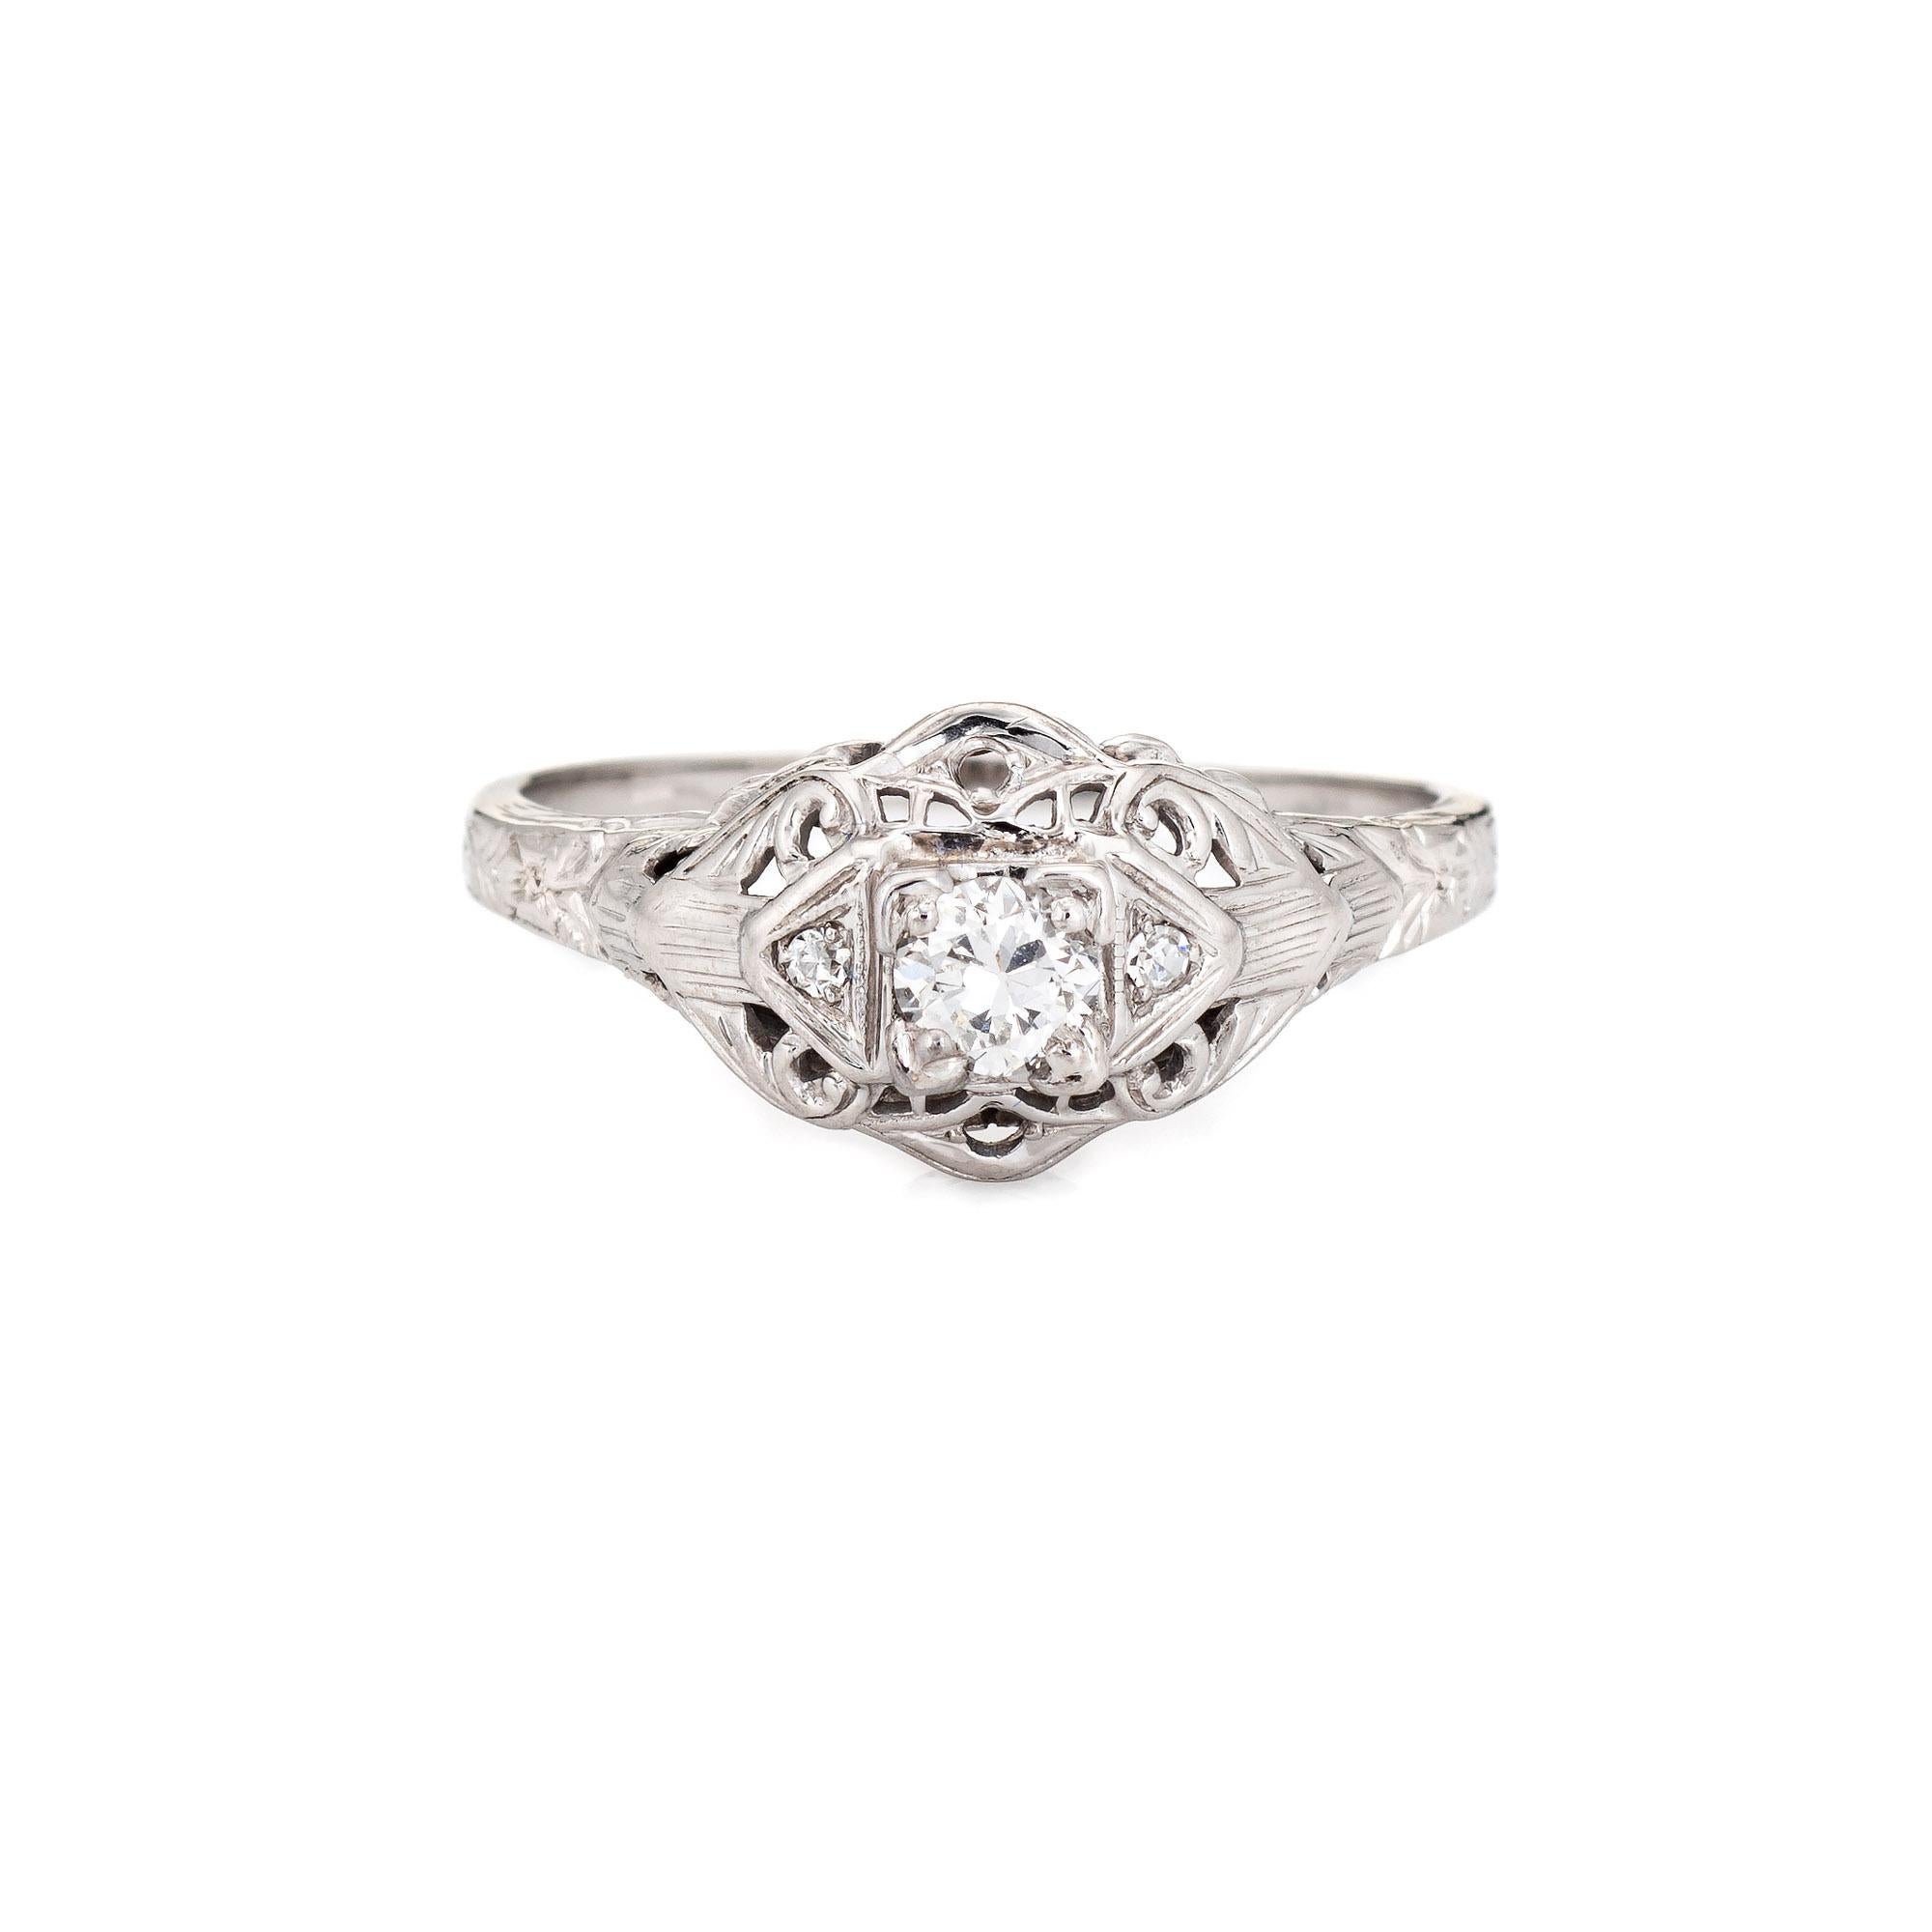 Finely detailed vintage Art Deco diamond engagement ring (circa 1920s to 1930s) crafted in 18 karat white gold. 

One old European cut diamond is estimated at 0.25 carats (estimated at H-I color and SI1 clarity). Two diamonds accent the center stone